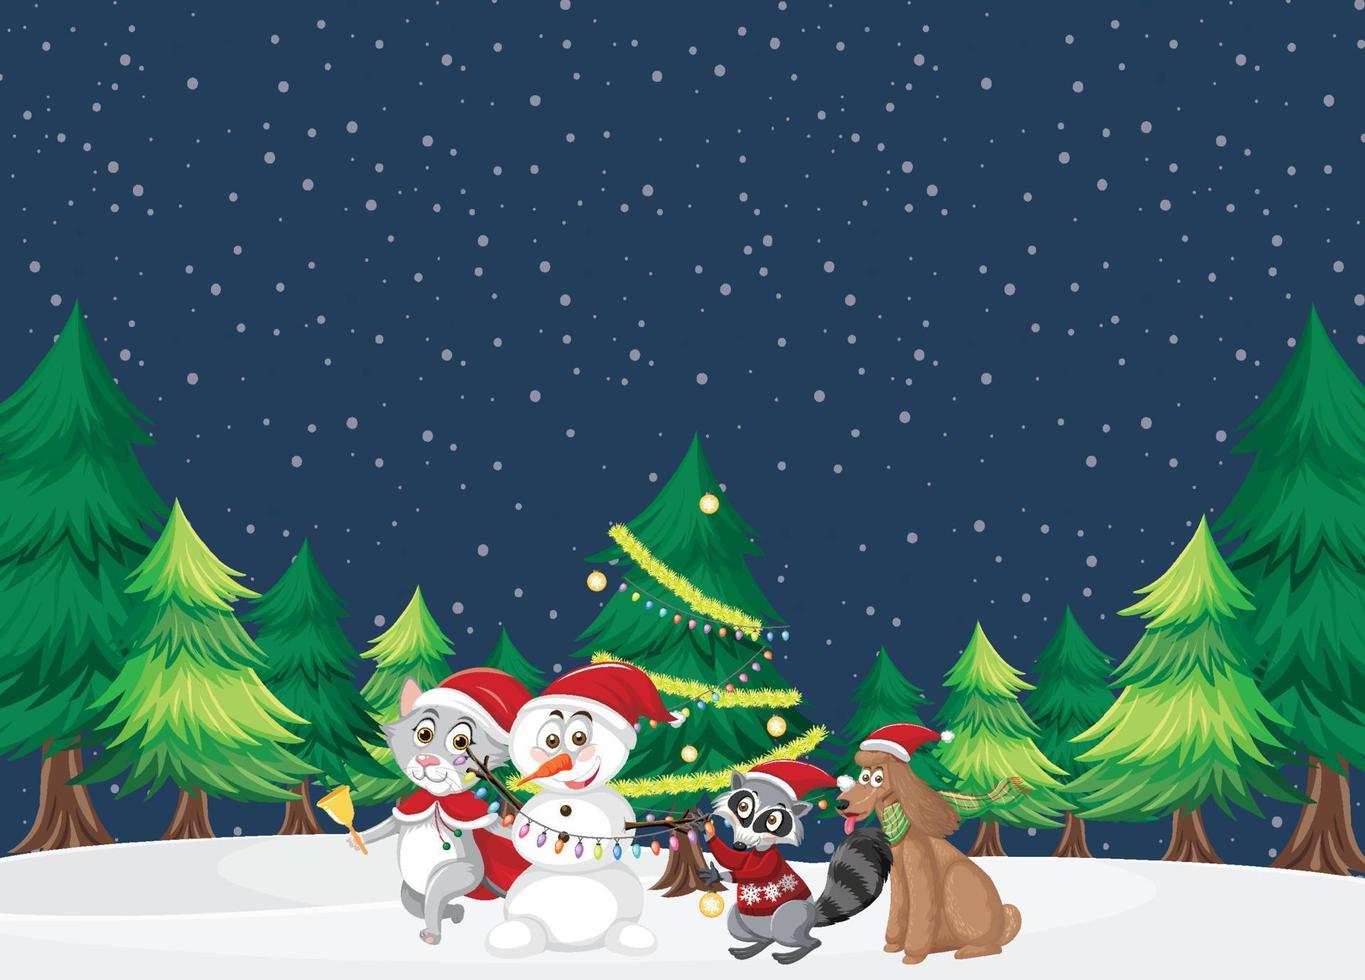 Christmas theme with snowman and animals vector